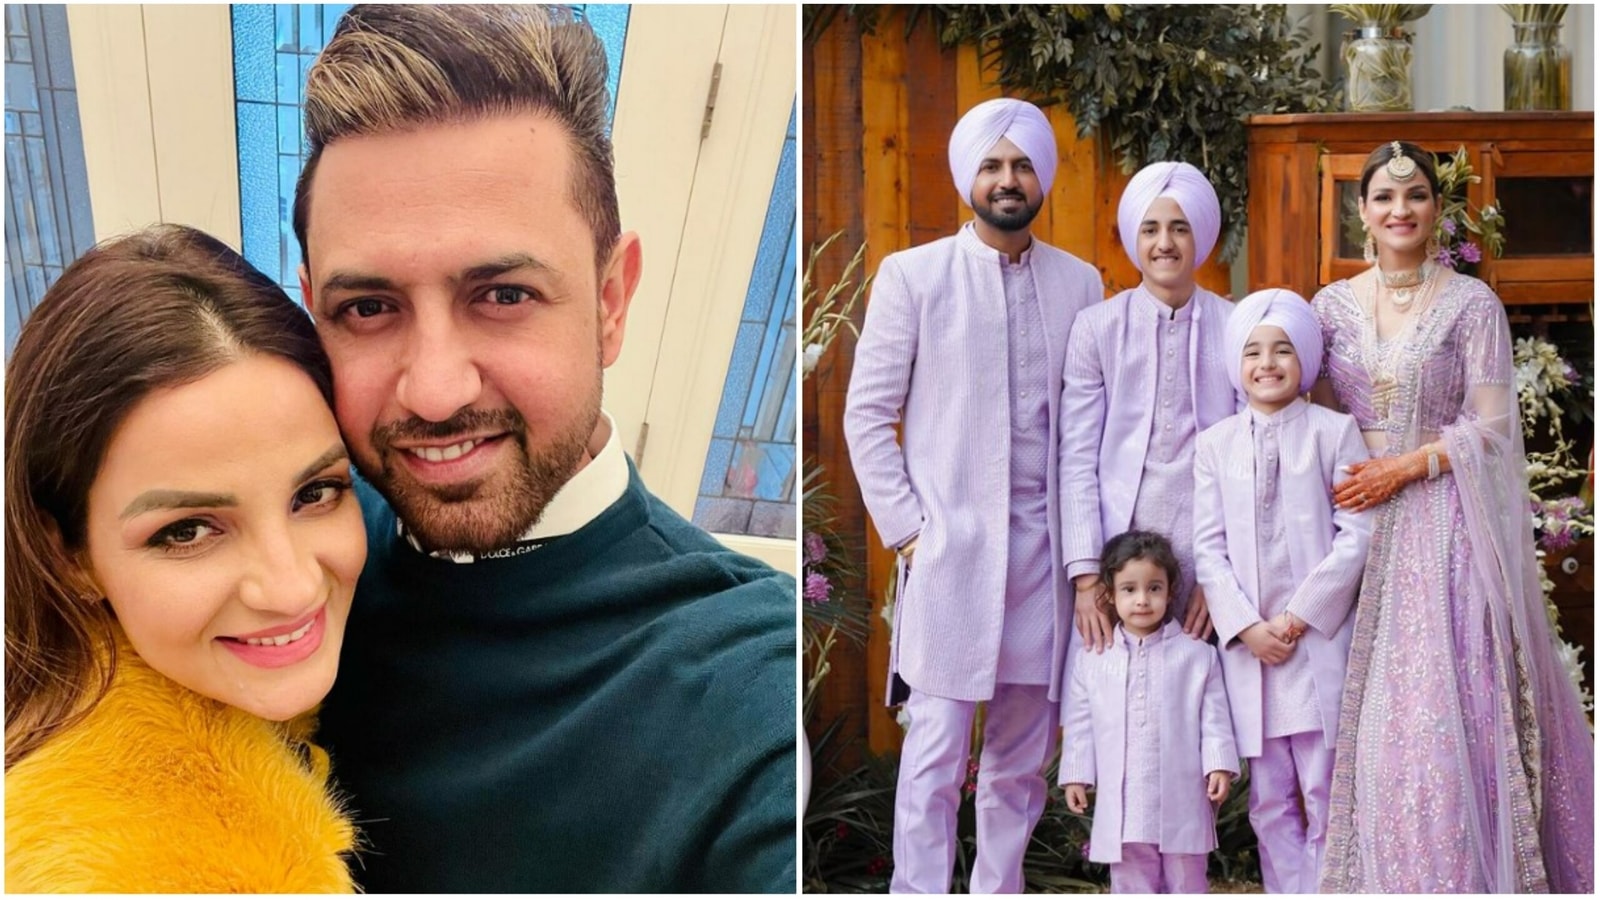 Gippy Grewal says he and wife worked 3 jobs in Canada to fund music career: ‘Delivered newspapers, cleaned, made bricks’